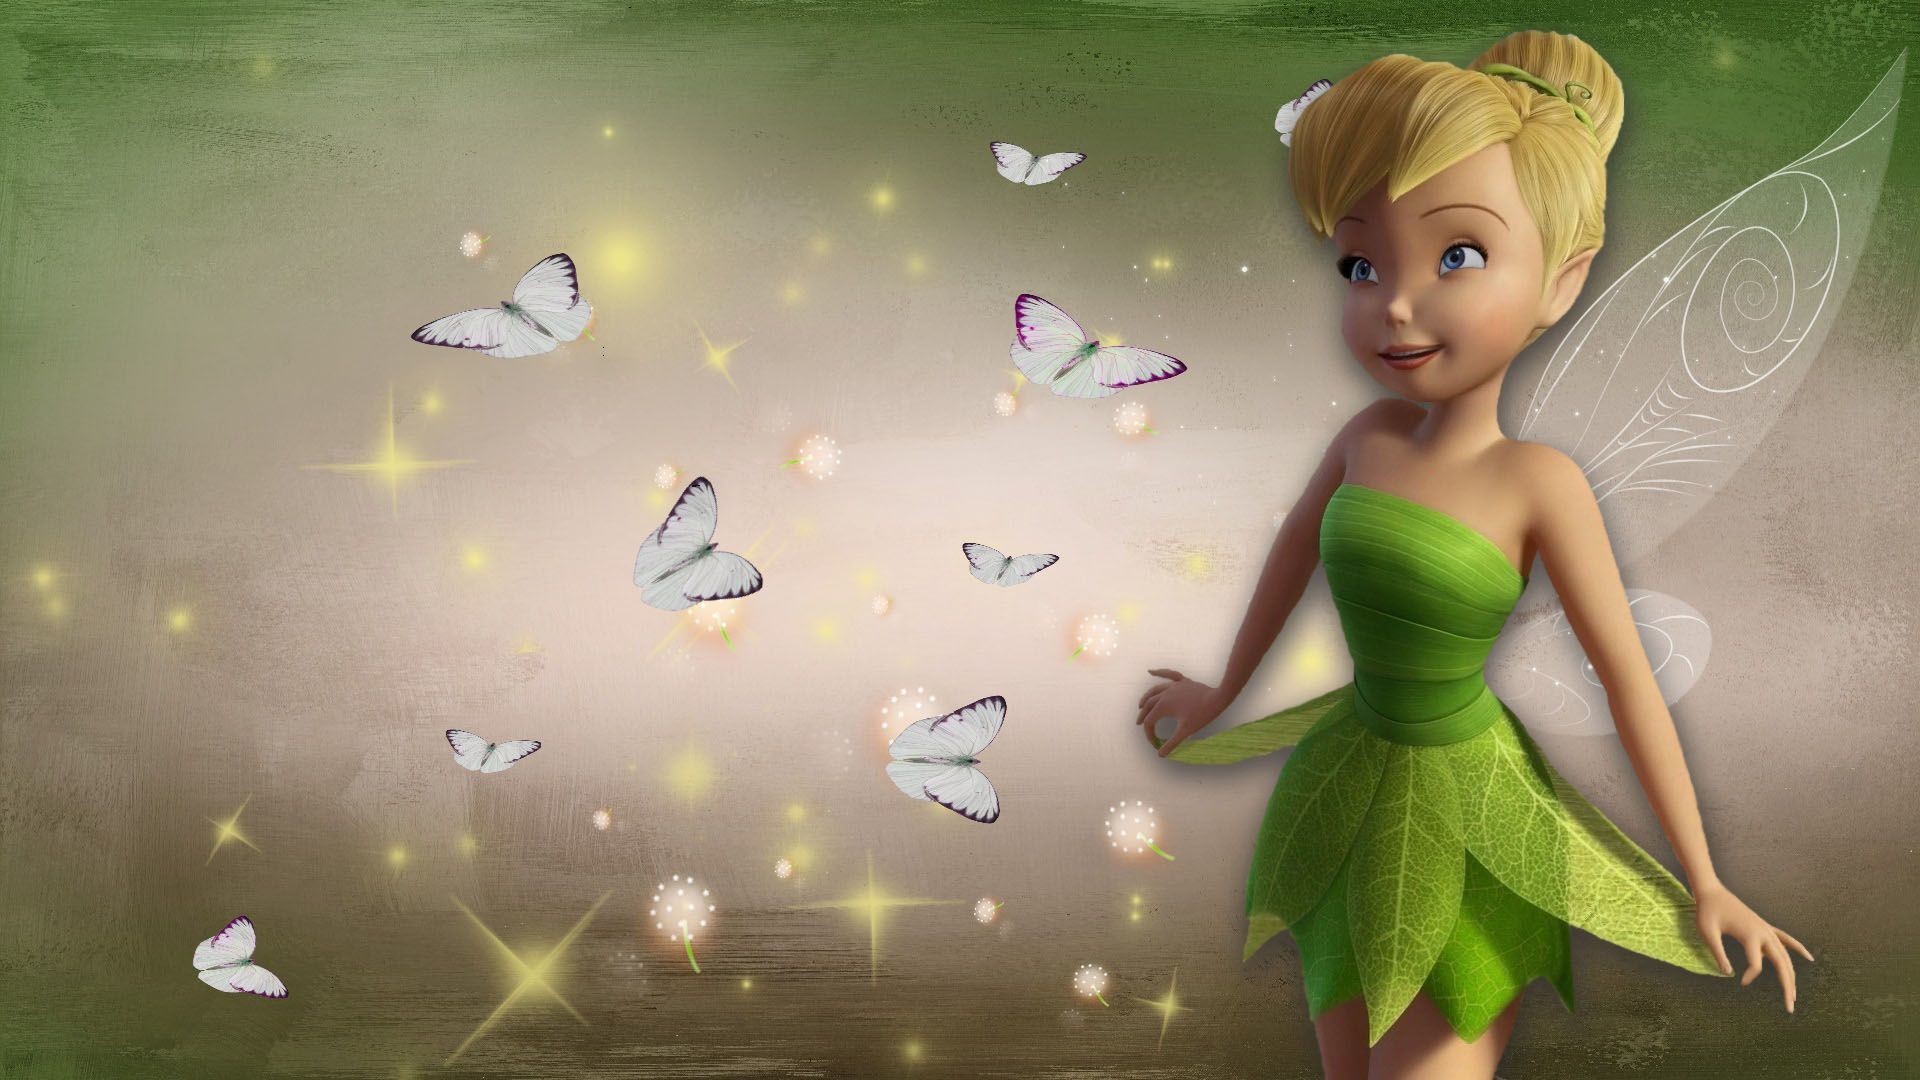 Free download Tinkerbell Wallpaper For Computers Hd lovely tinkerbell  mobile 480x800 for your Desktop Mobile  Tablet  Explore 75 Tinkerbell  Wallpaper For Computers  Background For Computers Free Tinkerbell  Wallpaper Backgrounds For Computers